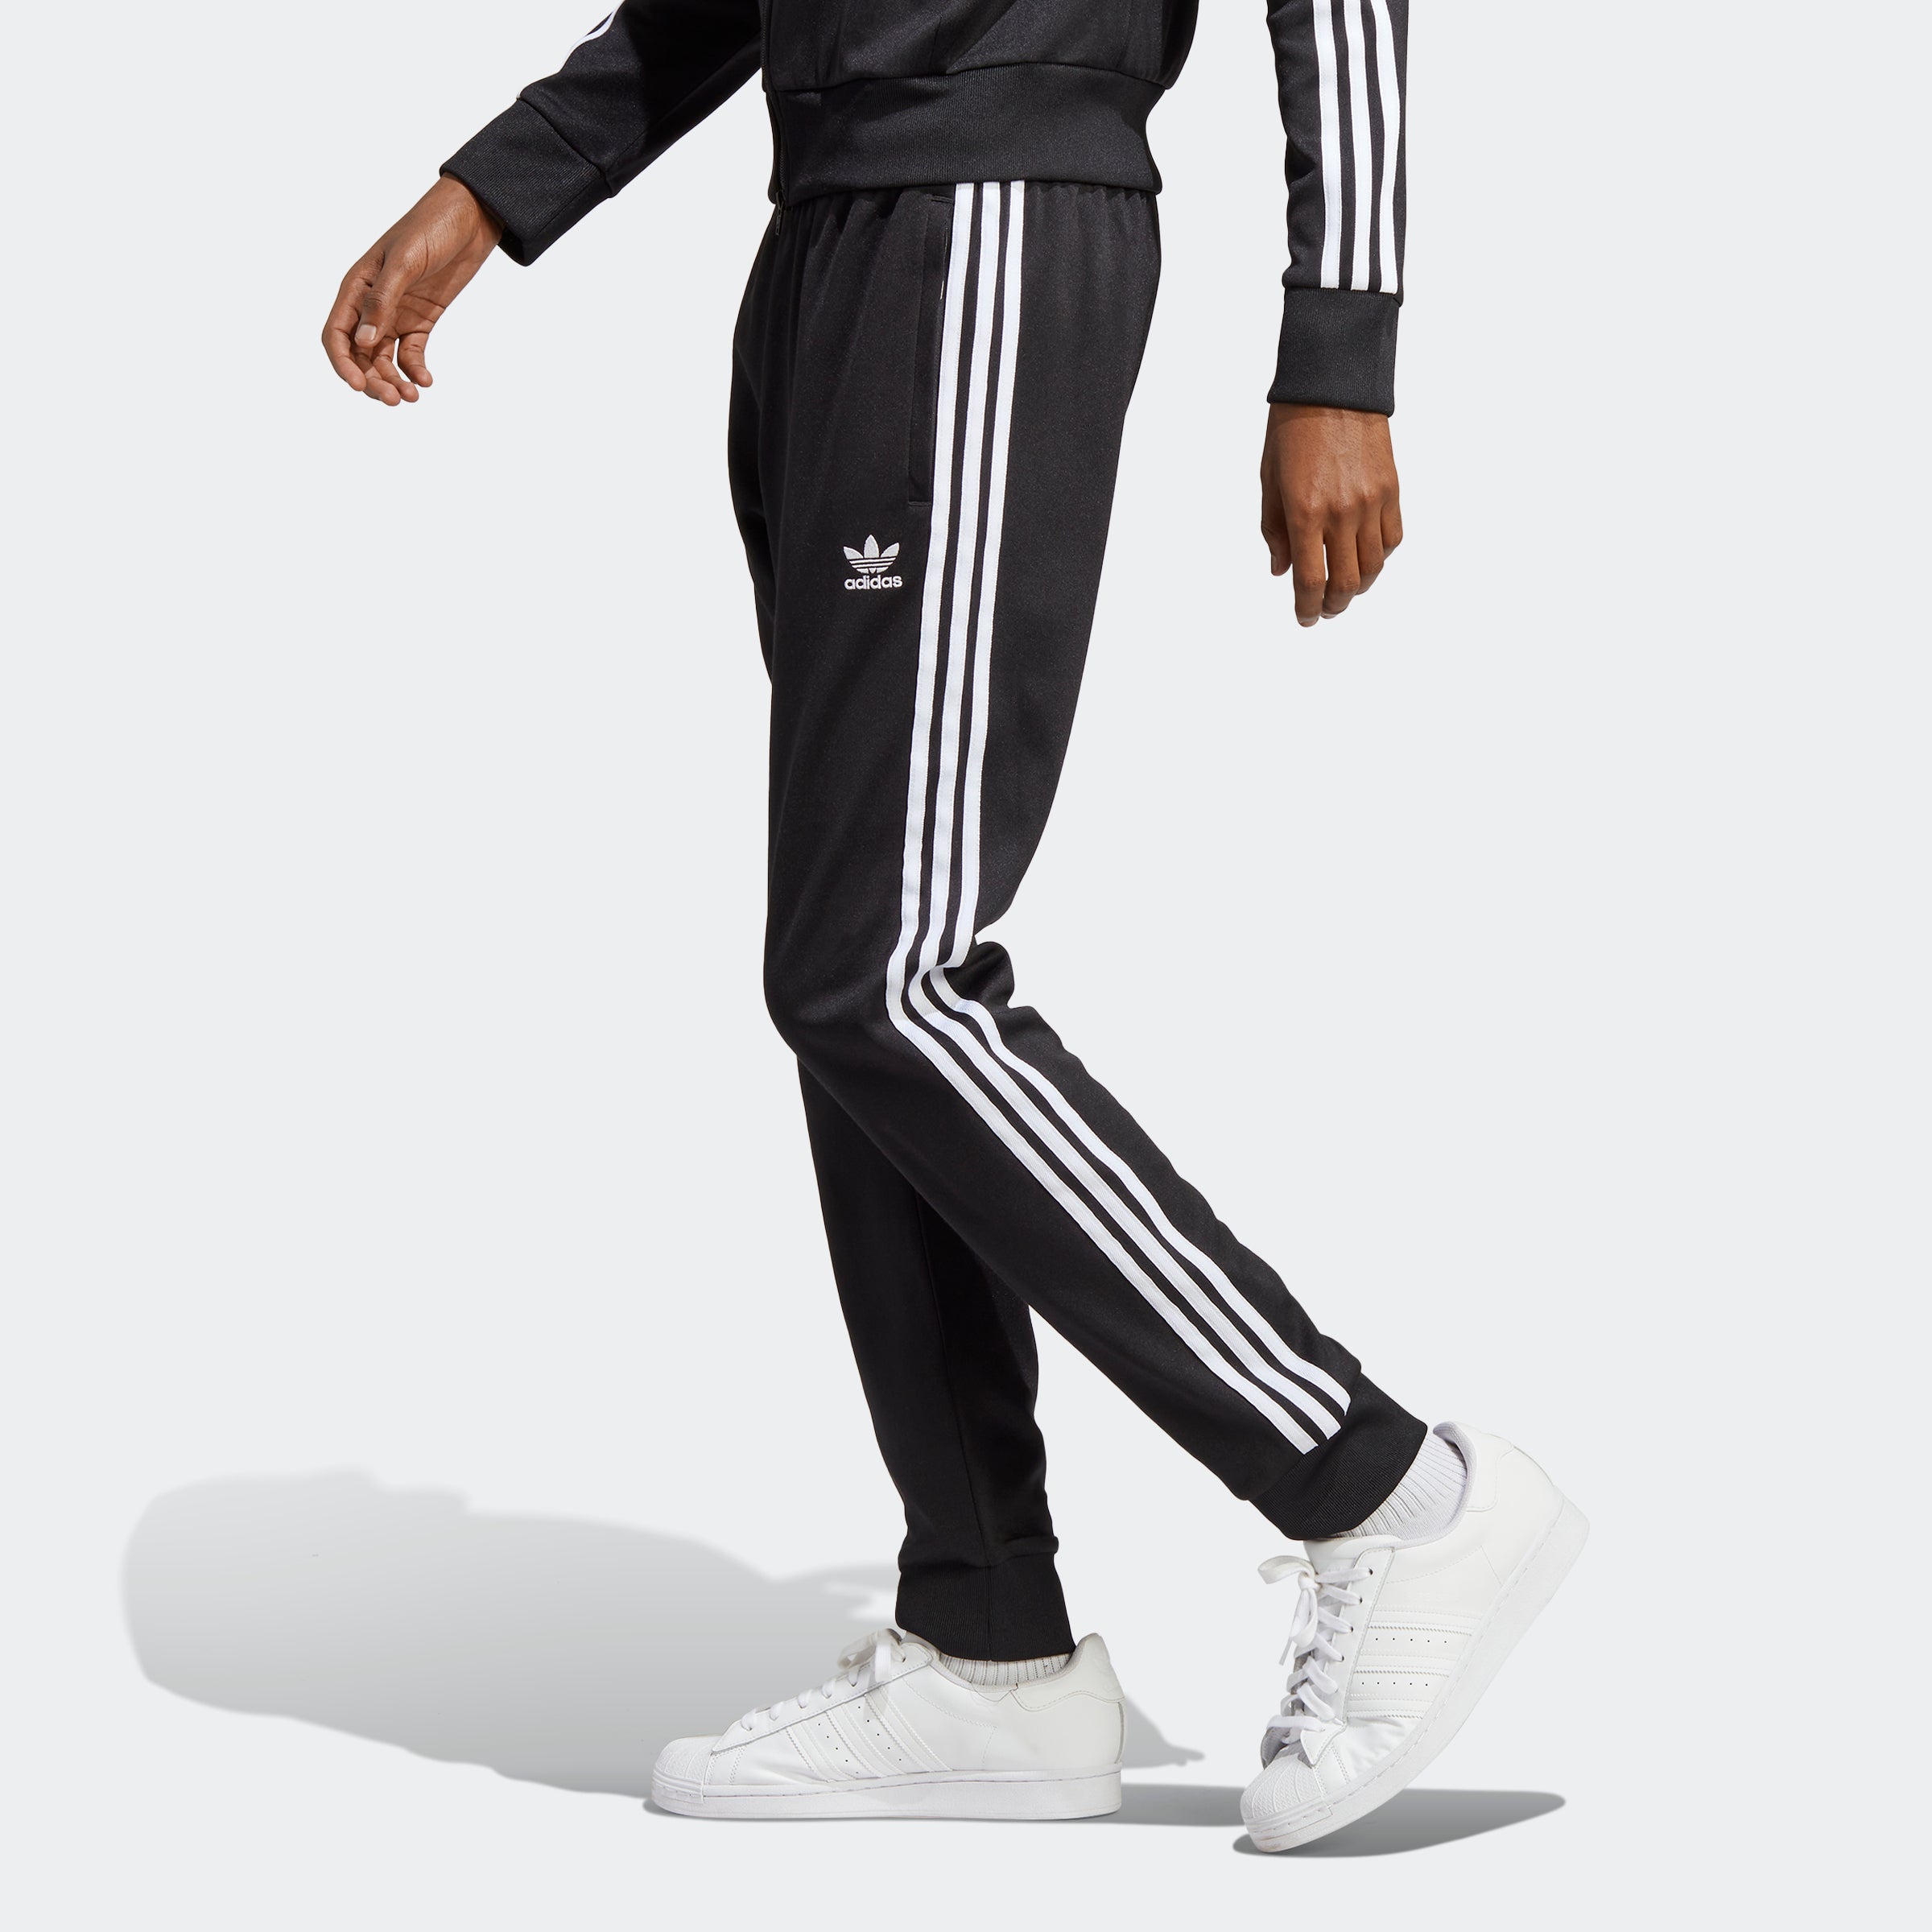 $60 Black And White Striped Standard Adidas Superstar Sneakers Teamed With  Black Sportswear Pants With A White Side Stripe Detail And…